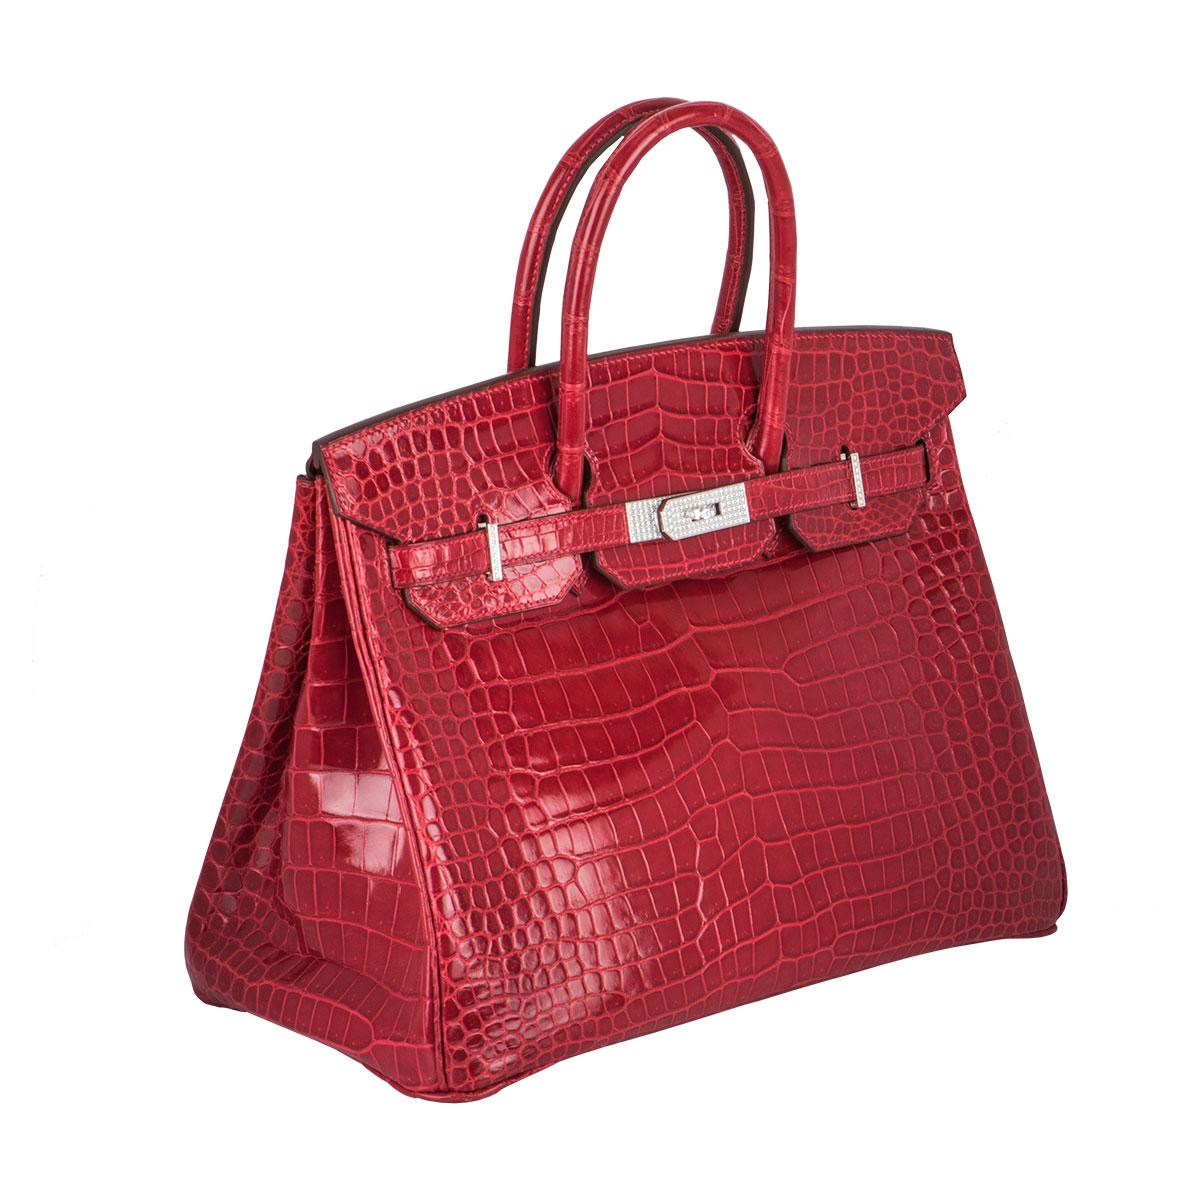 An exquisite Hermès 35cm Birkin Bag. A sort after piece this exotic shiny braise Porosus Crocodile bag, detailed with white gold hardware and set with round brilliant cut diamonds totalling approximately 10.00ct. The bag has dual rolled top handles